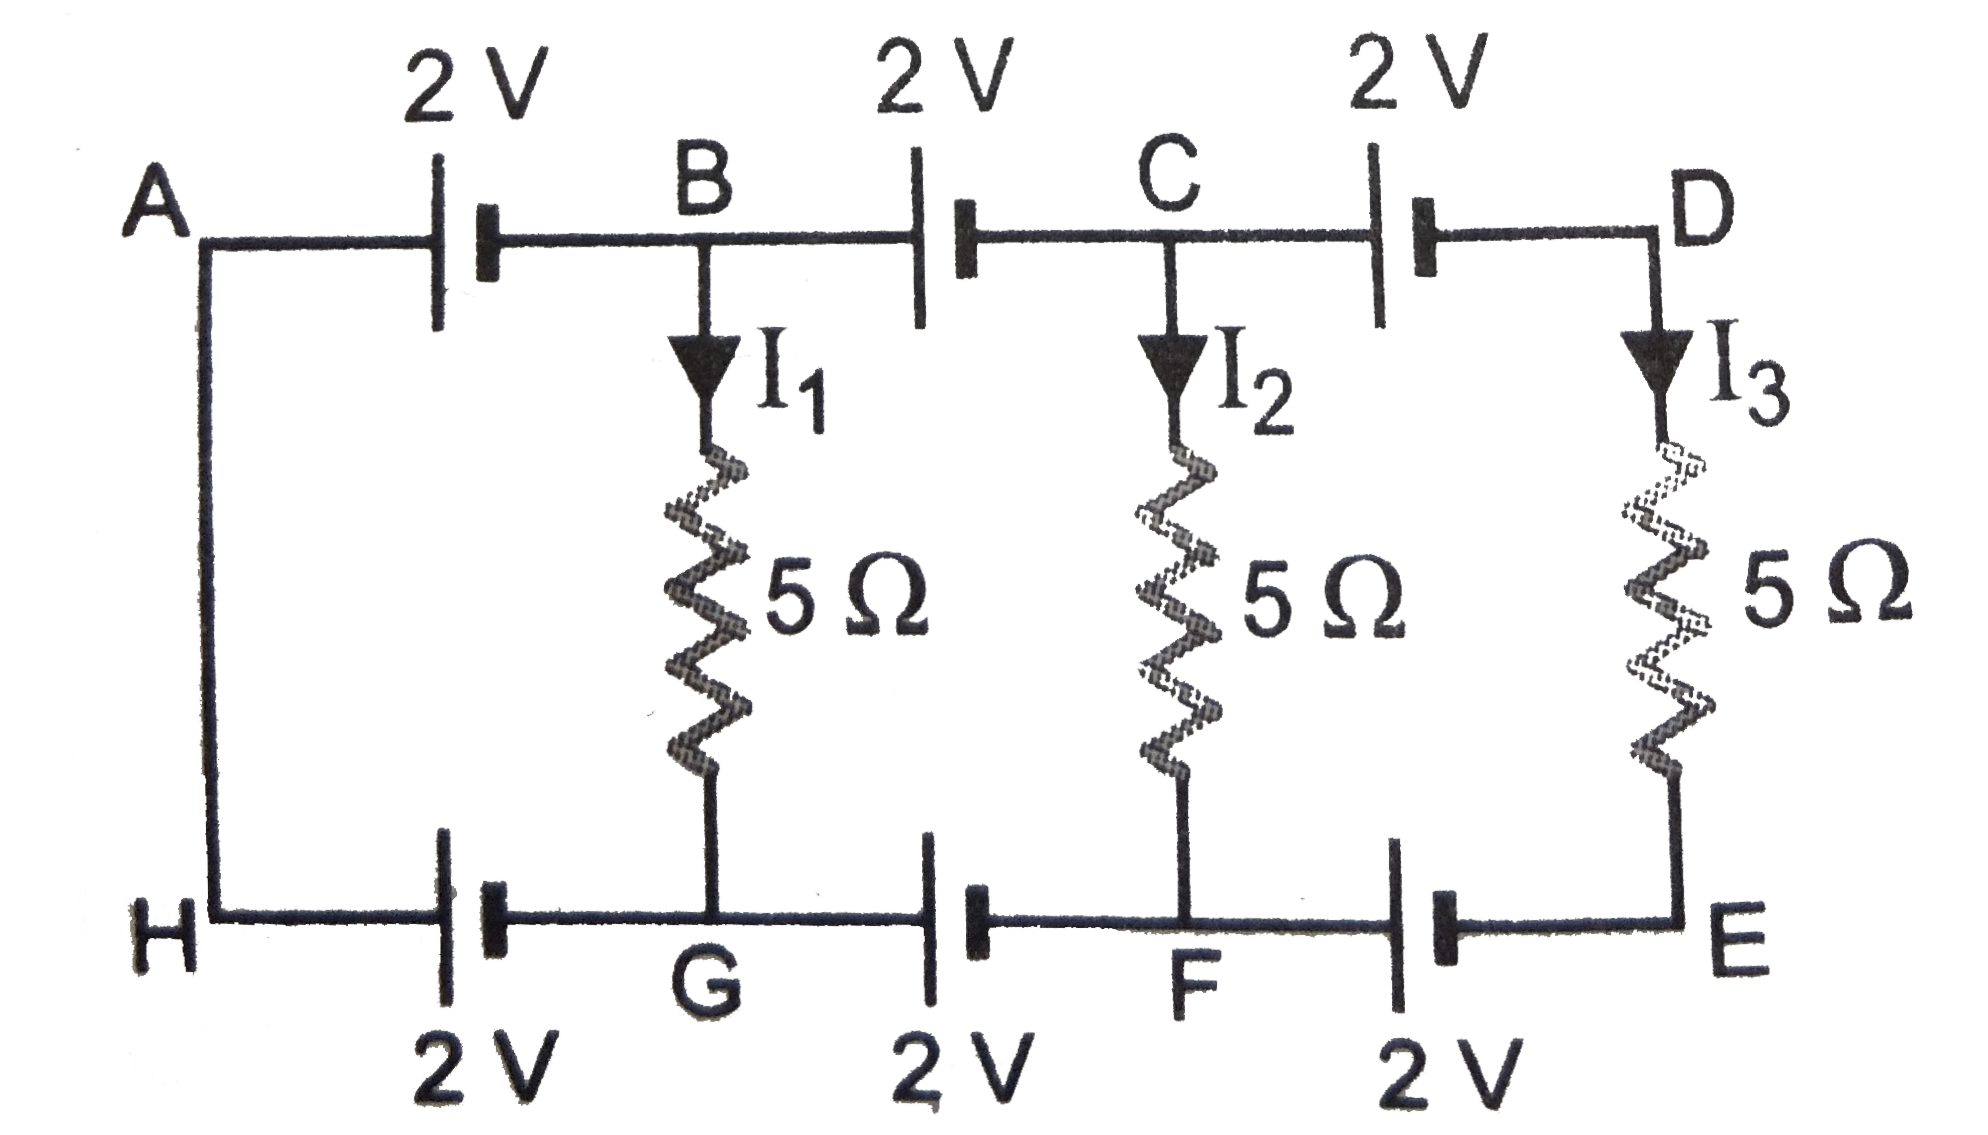 Find the current I(1) ,I(2) and I(3) through the there resistor circuit